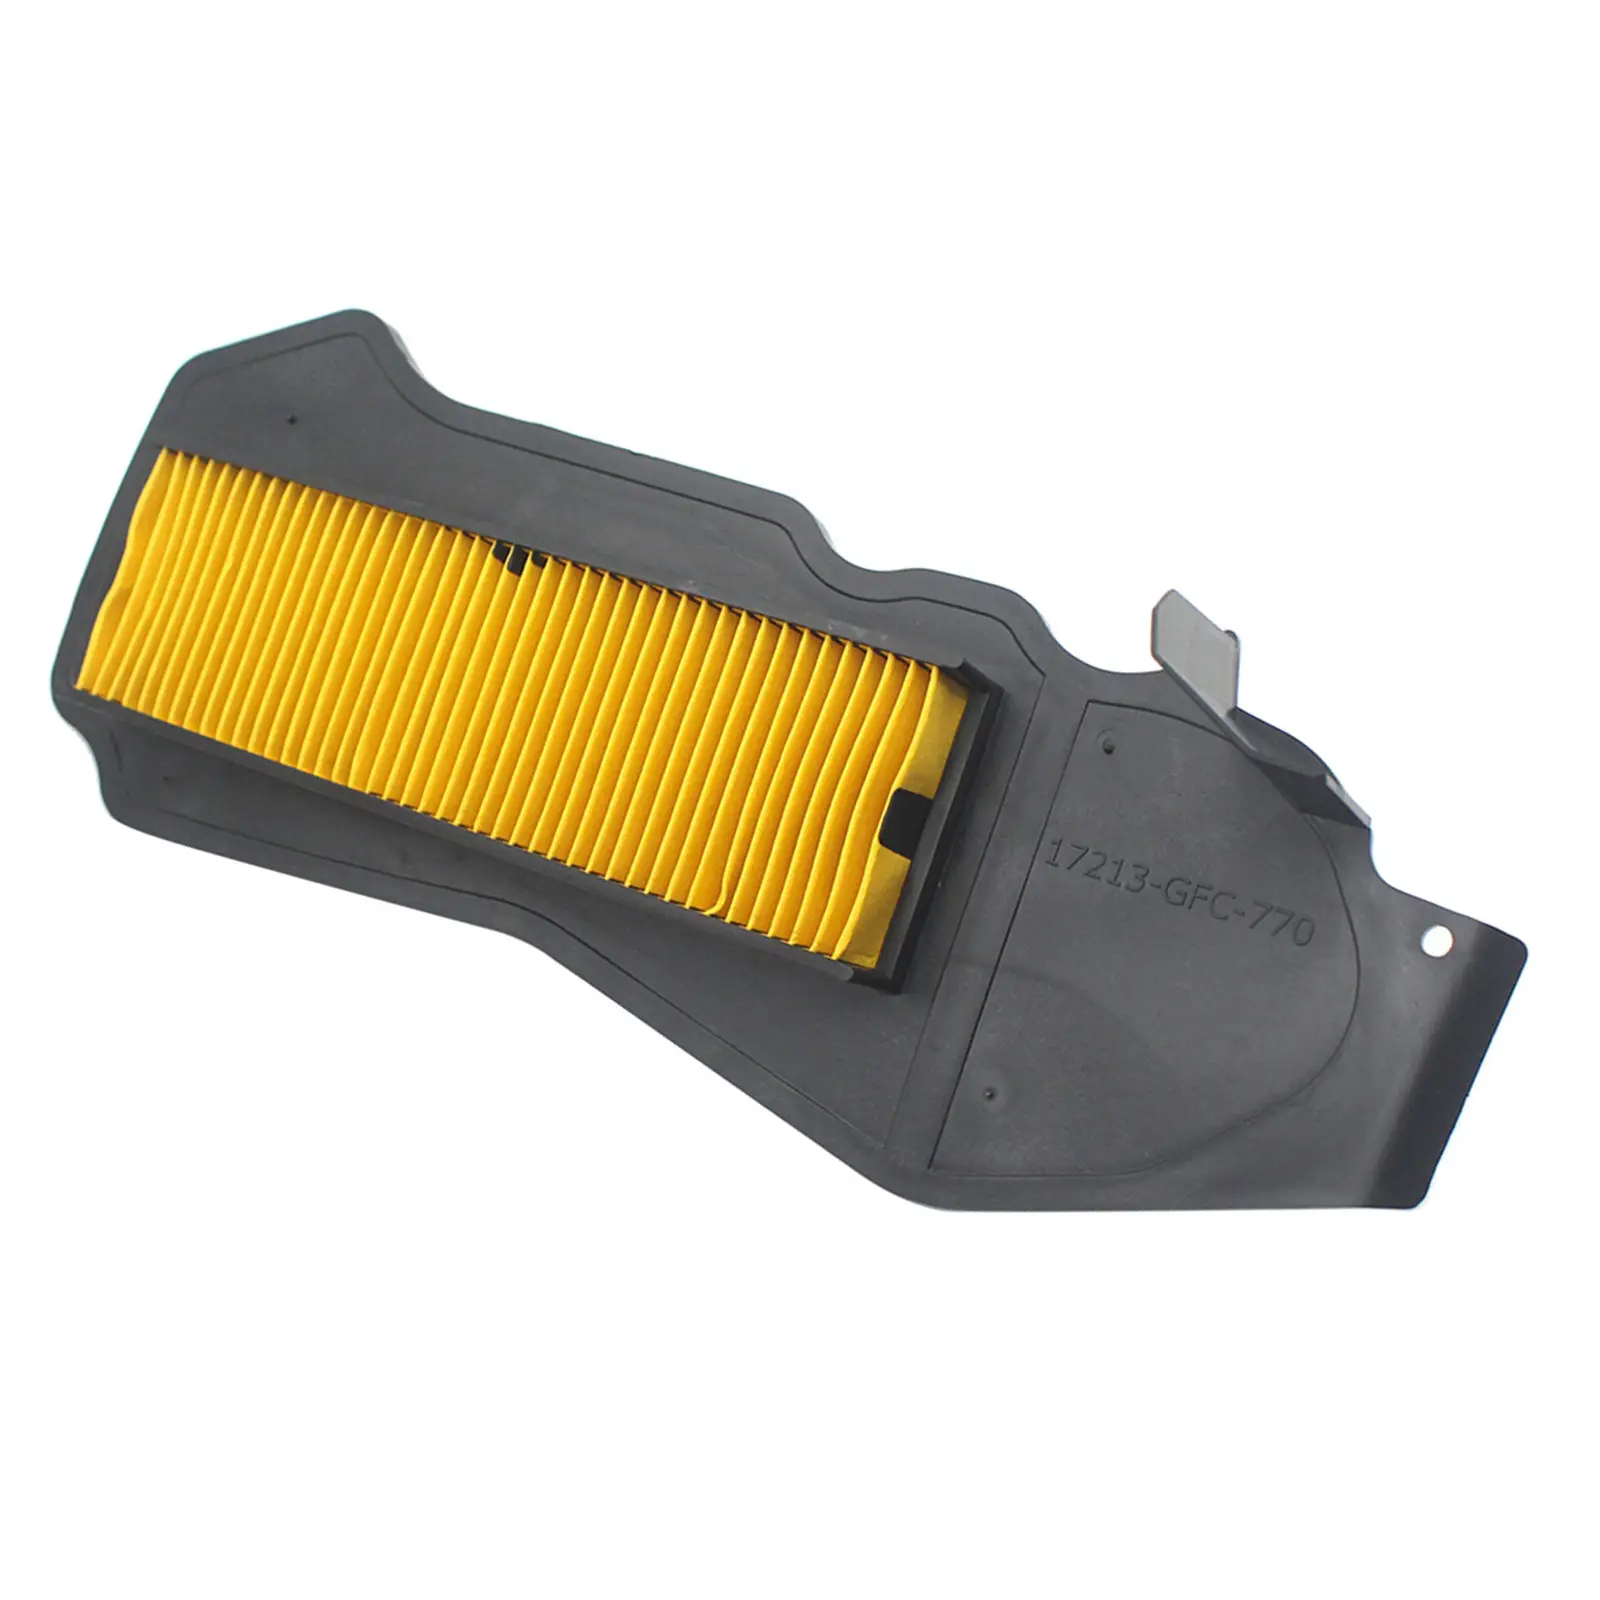 1x New Replacement Motorcycle Air Filter For HONDA Dio AF68 Air Filter